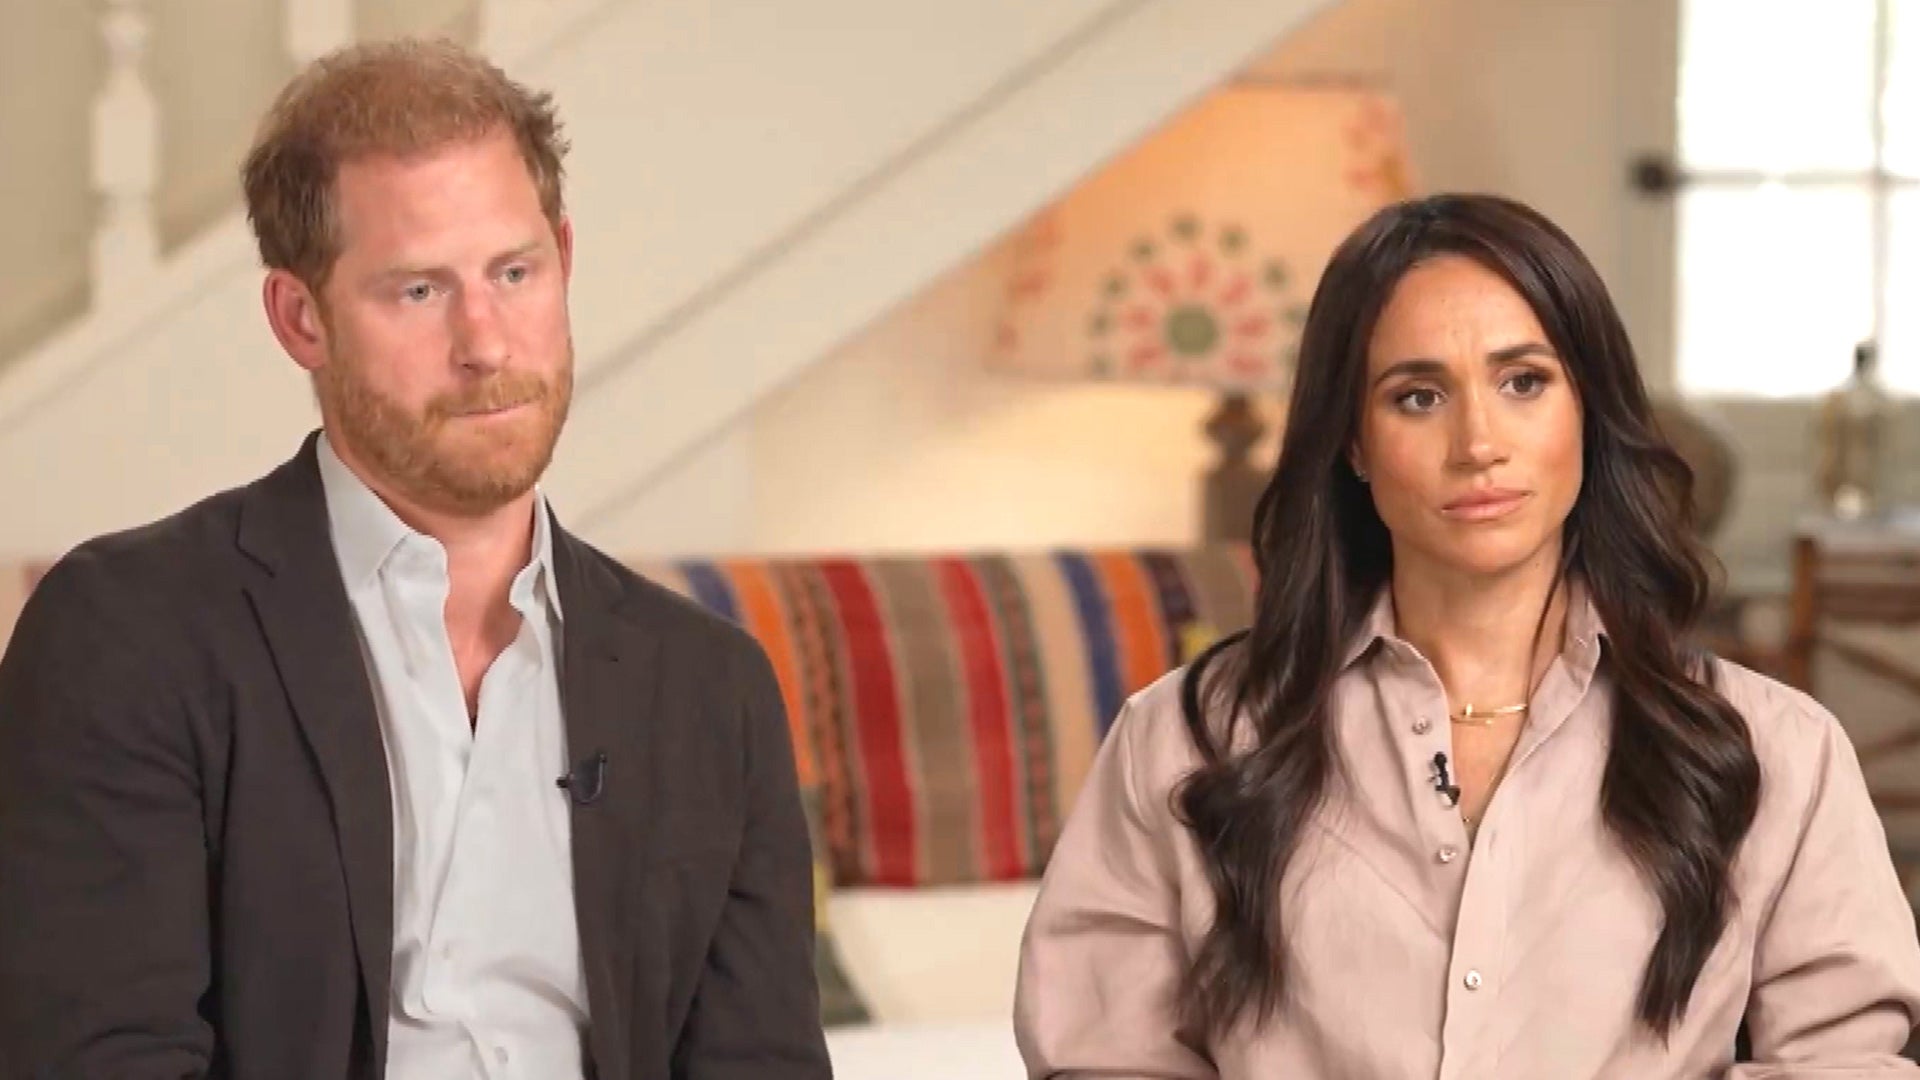 Prince Harry Compares Parenting With Meghan Markle to Being 'First Responders’